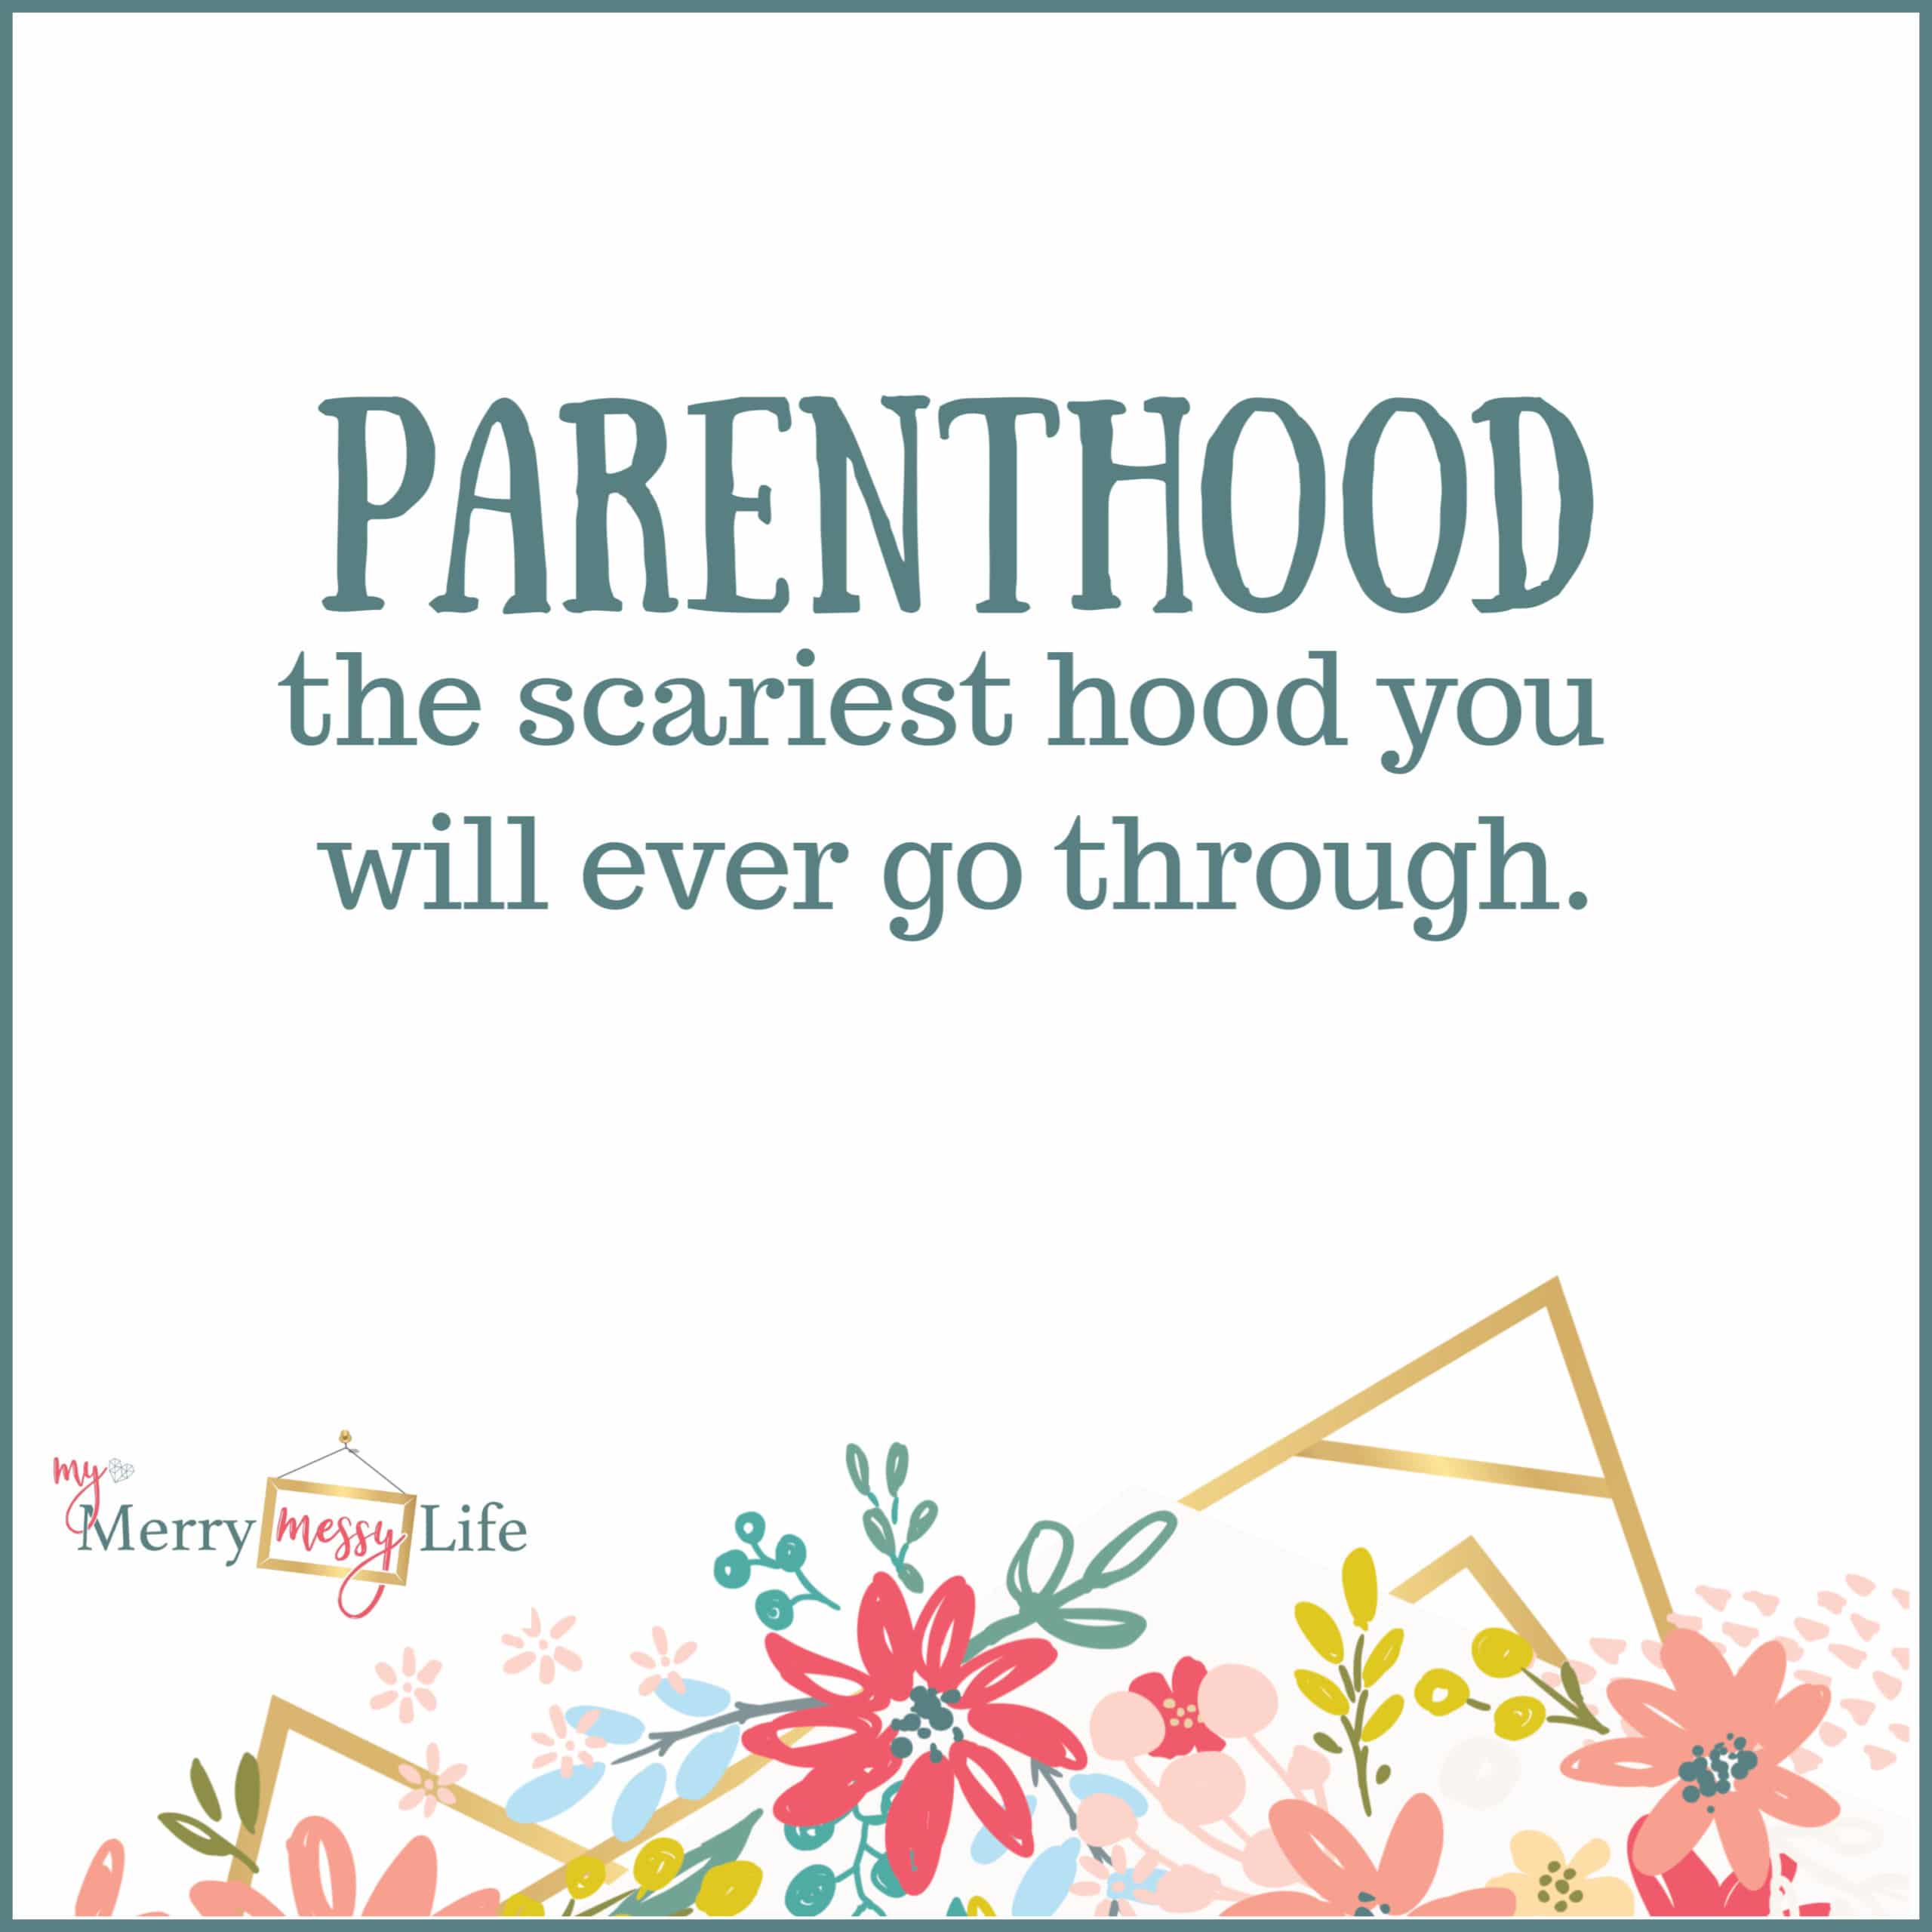 Parenthood - the scariest hood you will ever go through. Funny Mom Memes about Toddlers